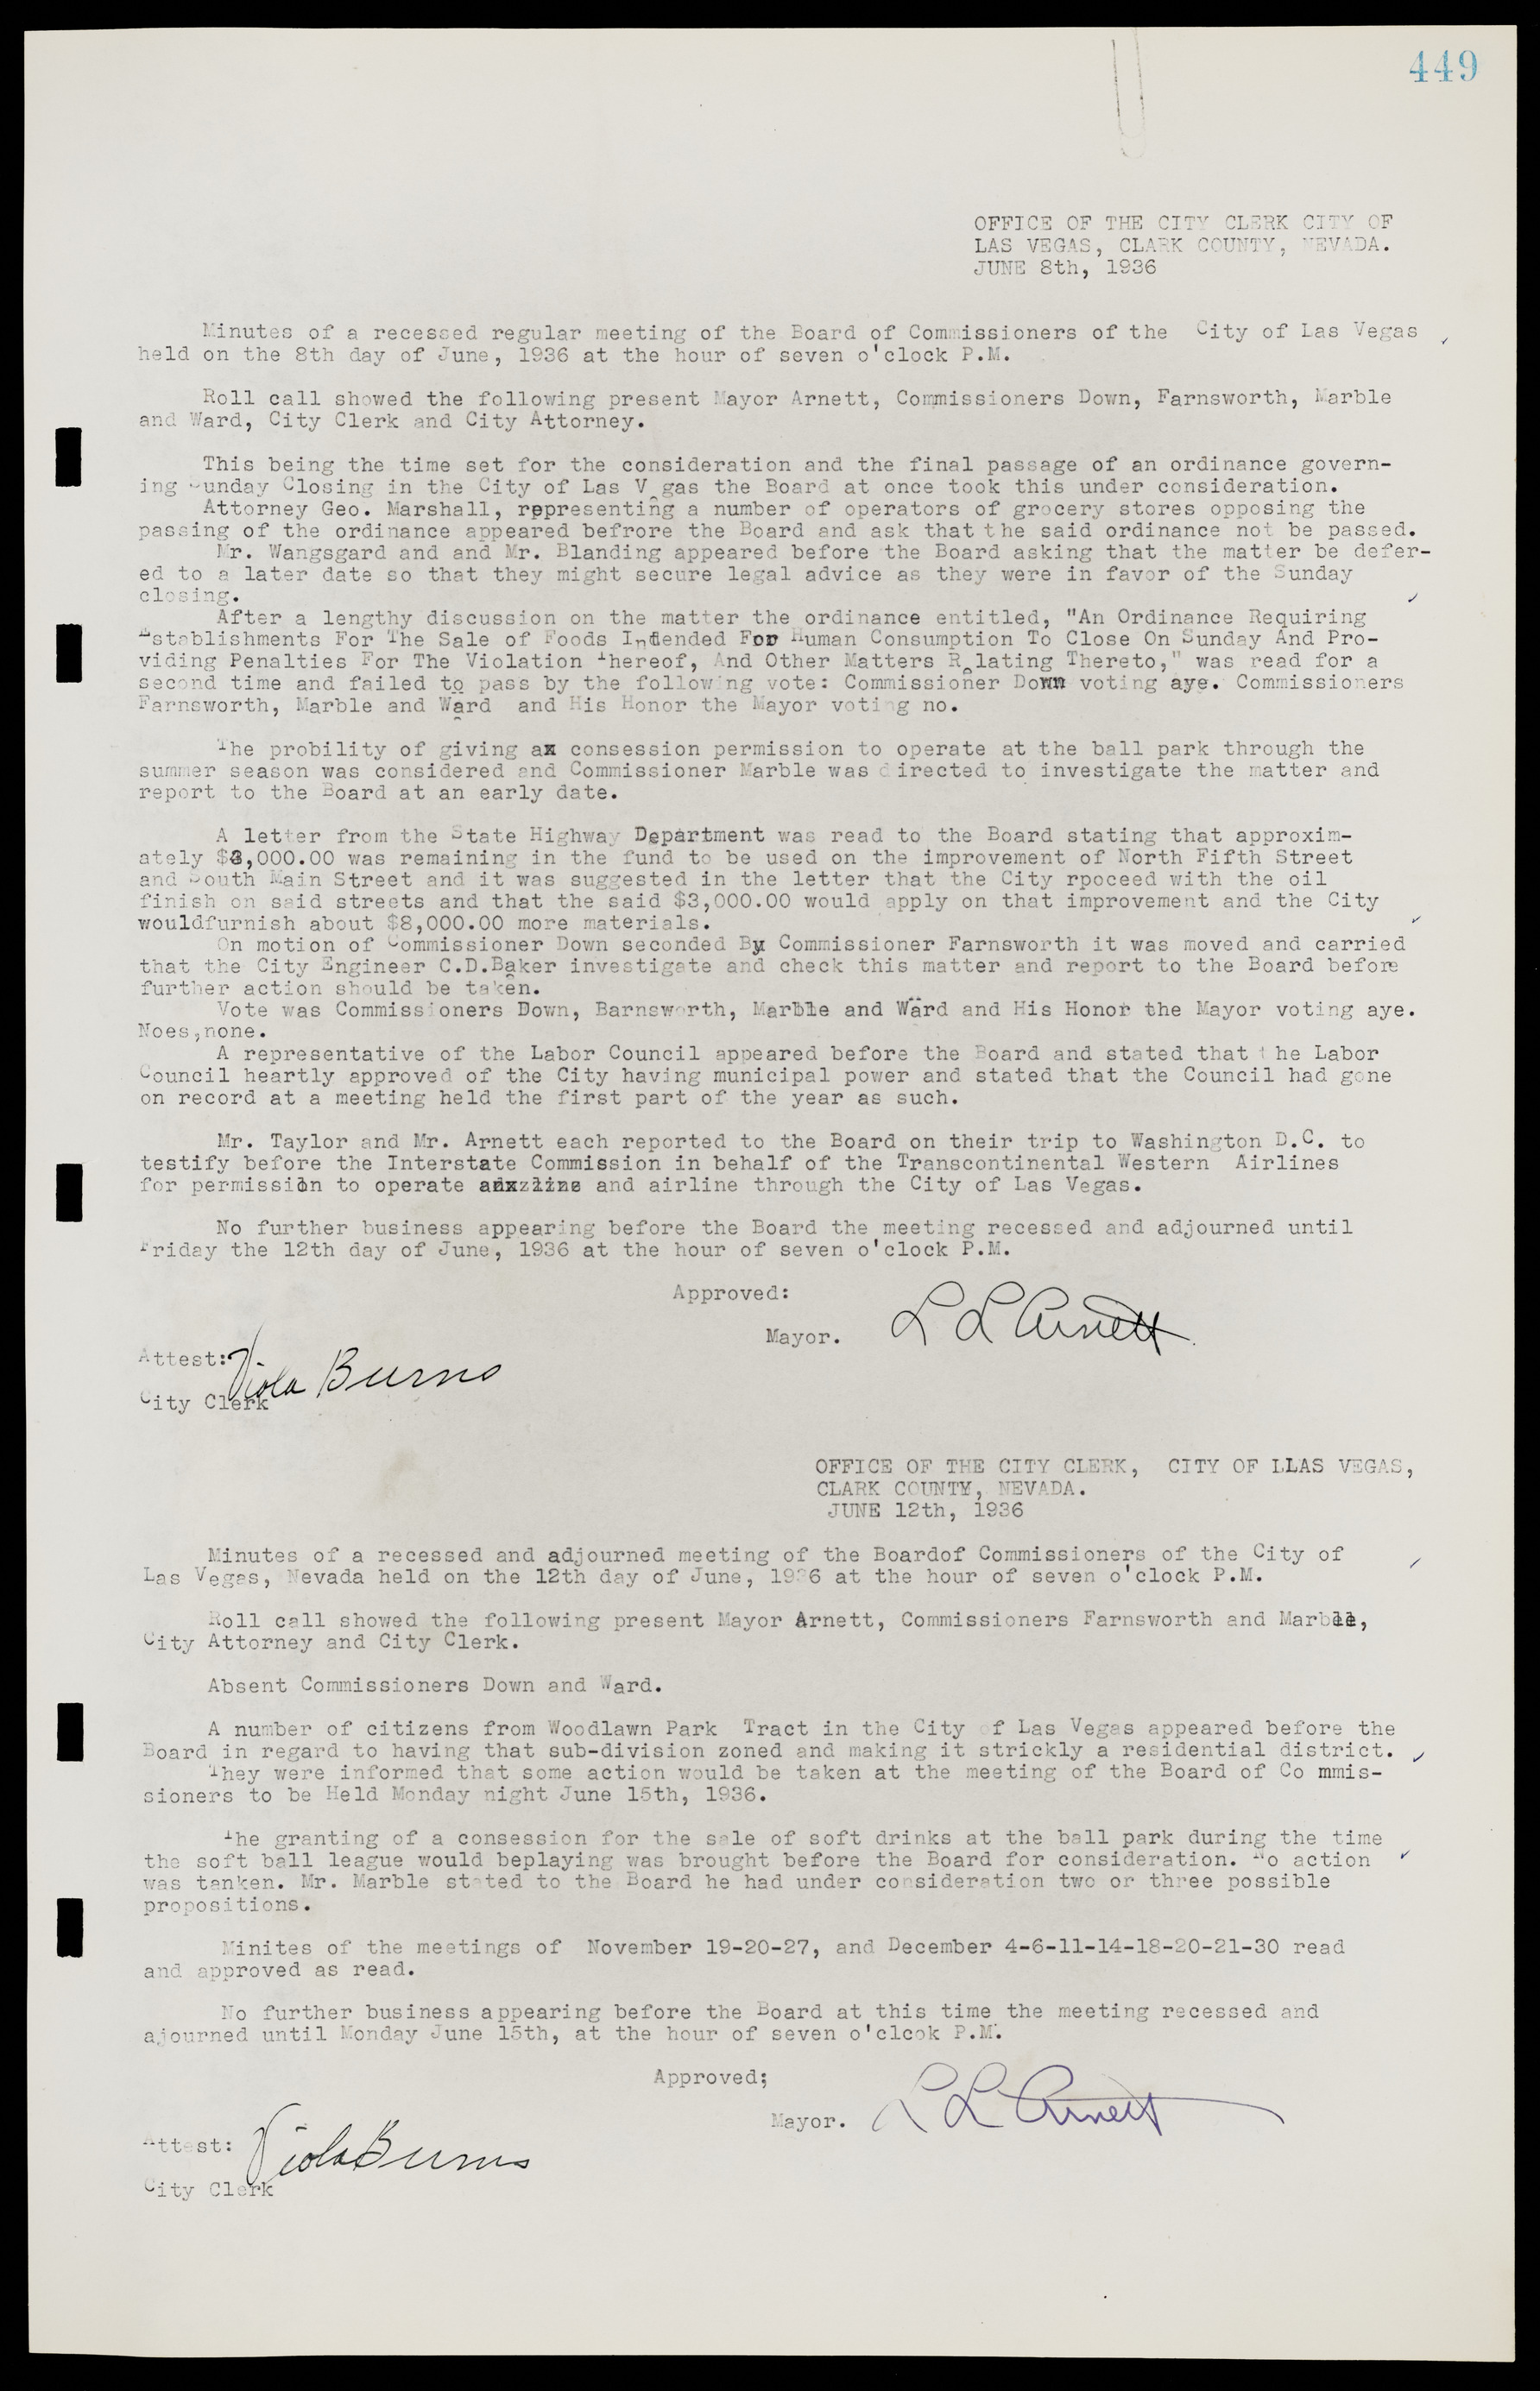 Las Vegas City Commission Minutes, May 14, 1929 to February 11, 1937, lvc000003-456